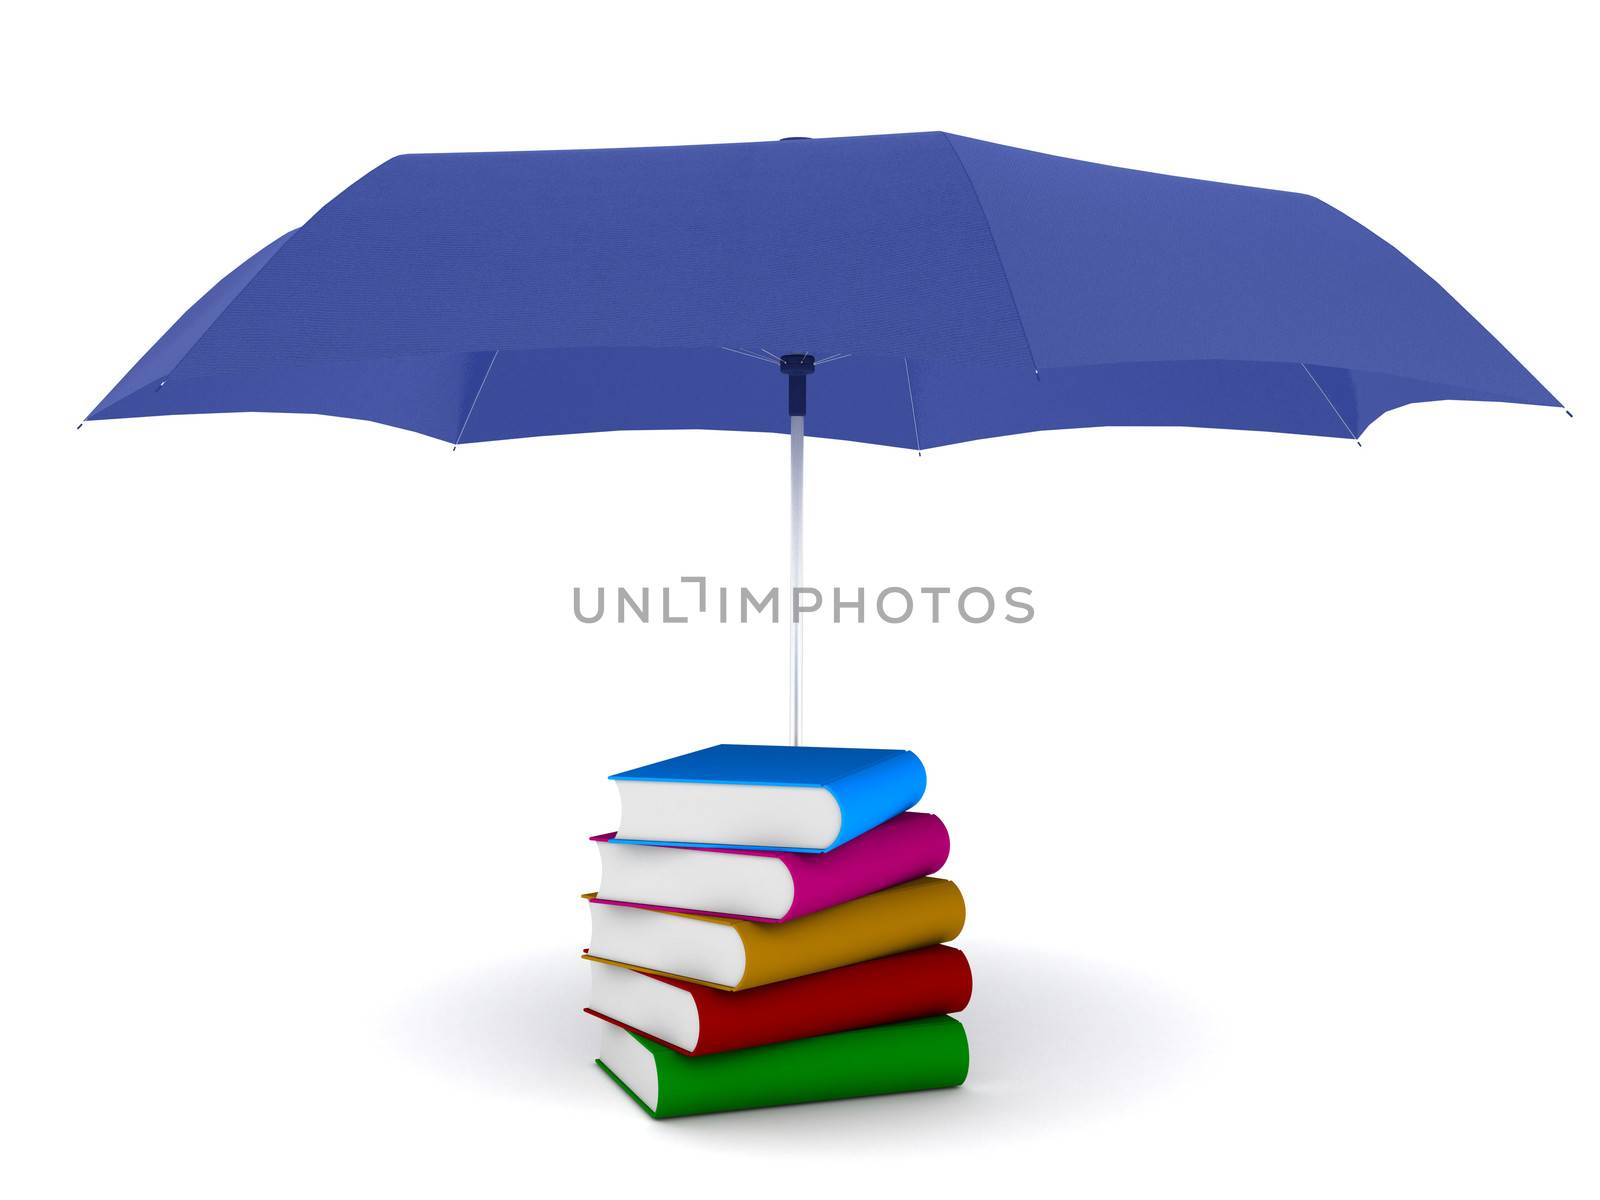 3d umbrella covers books for safety and safe